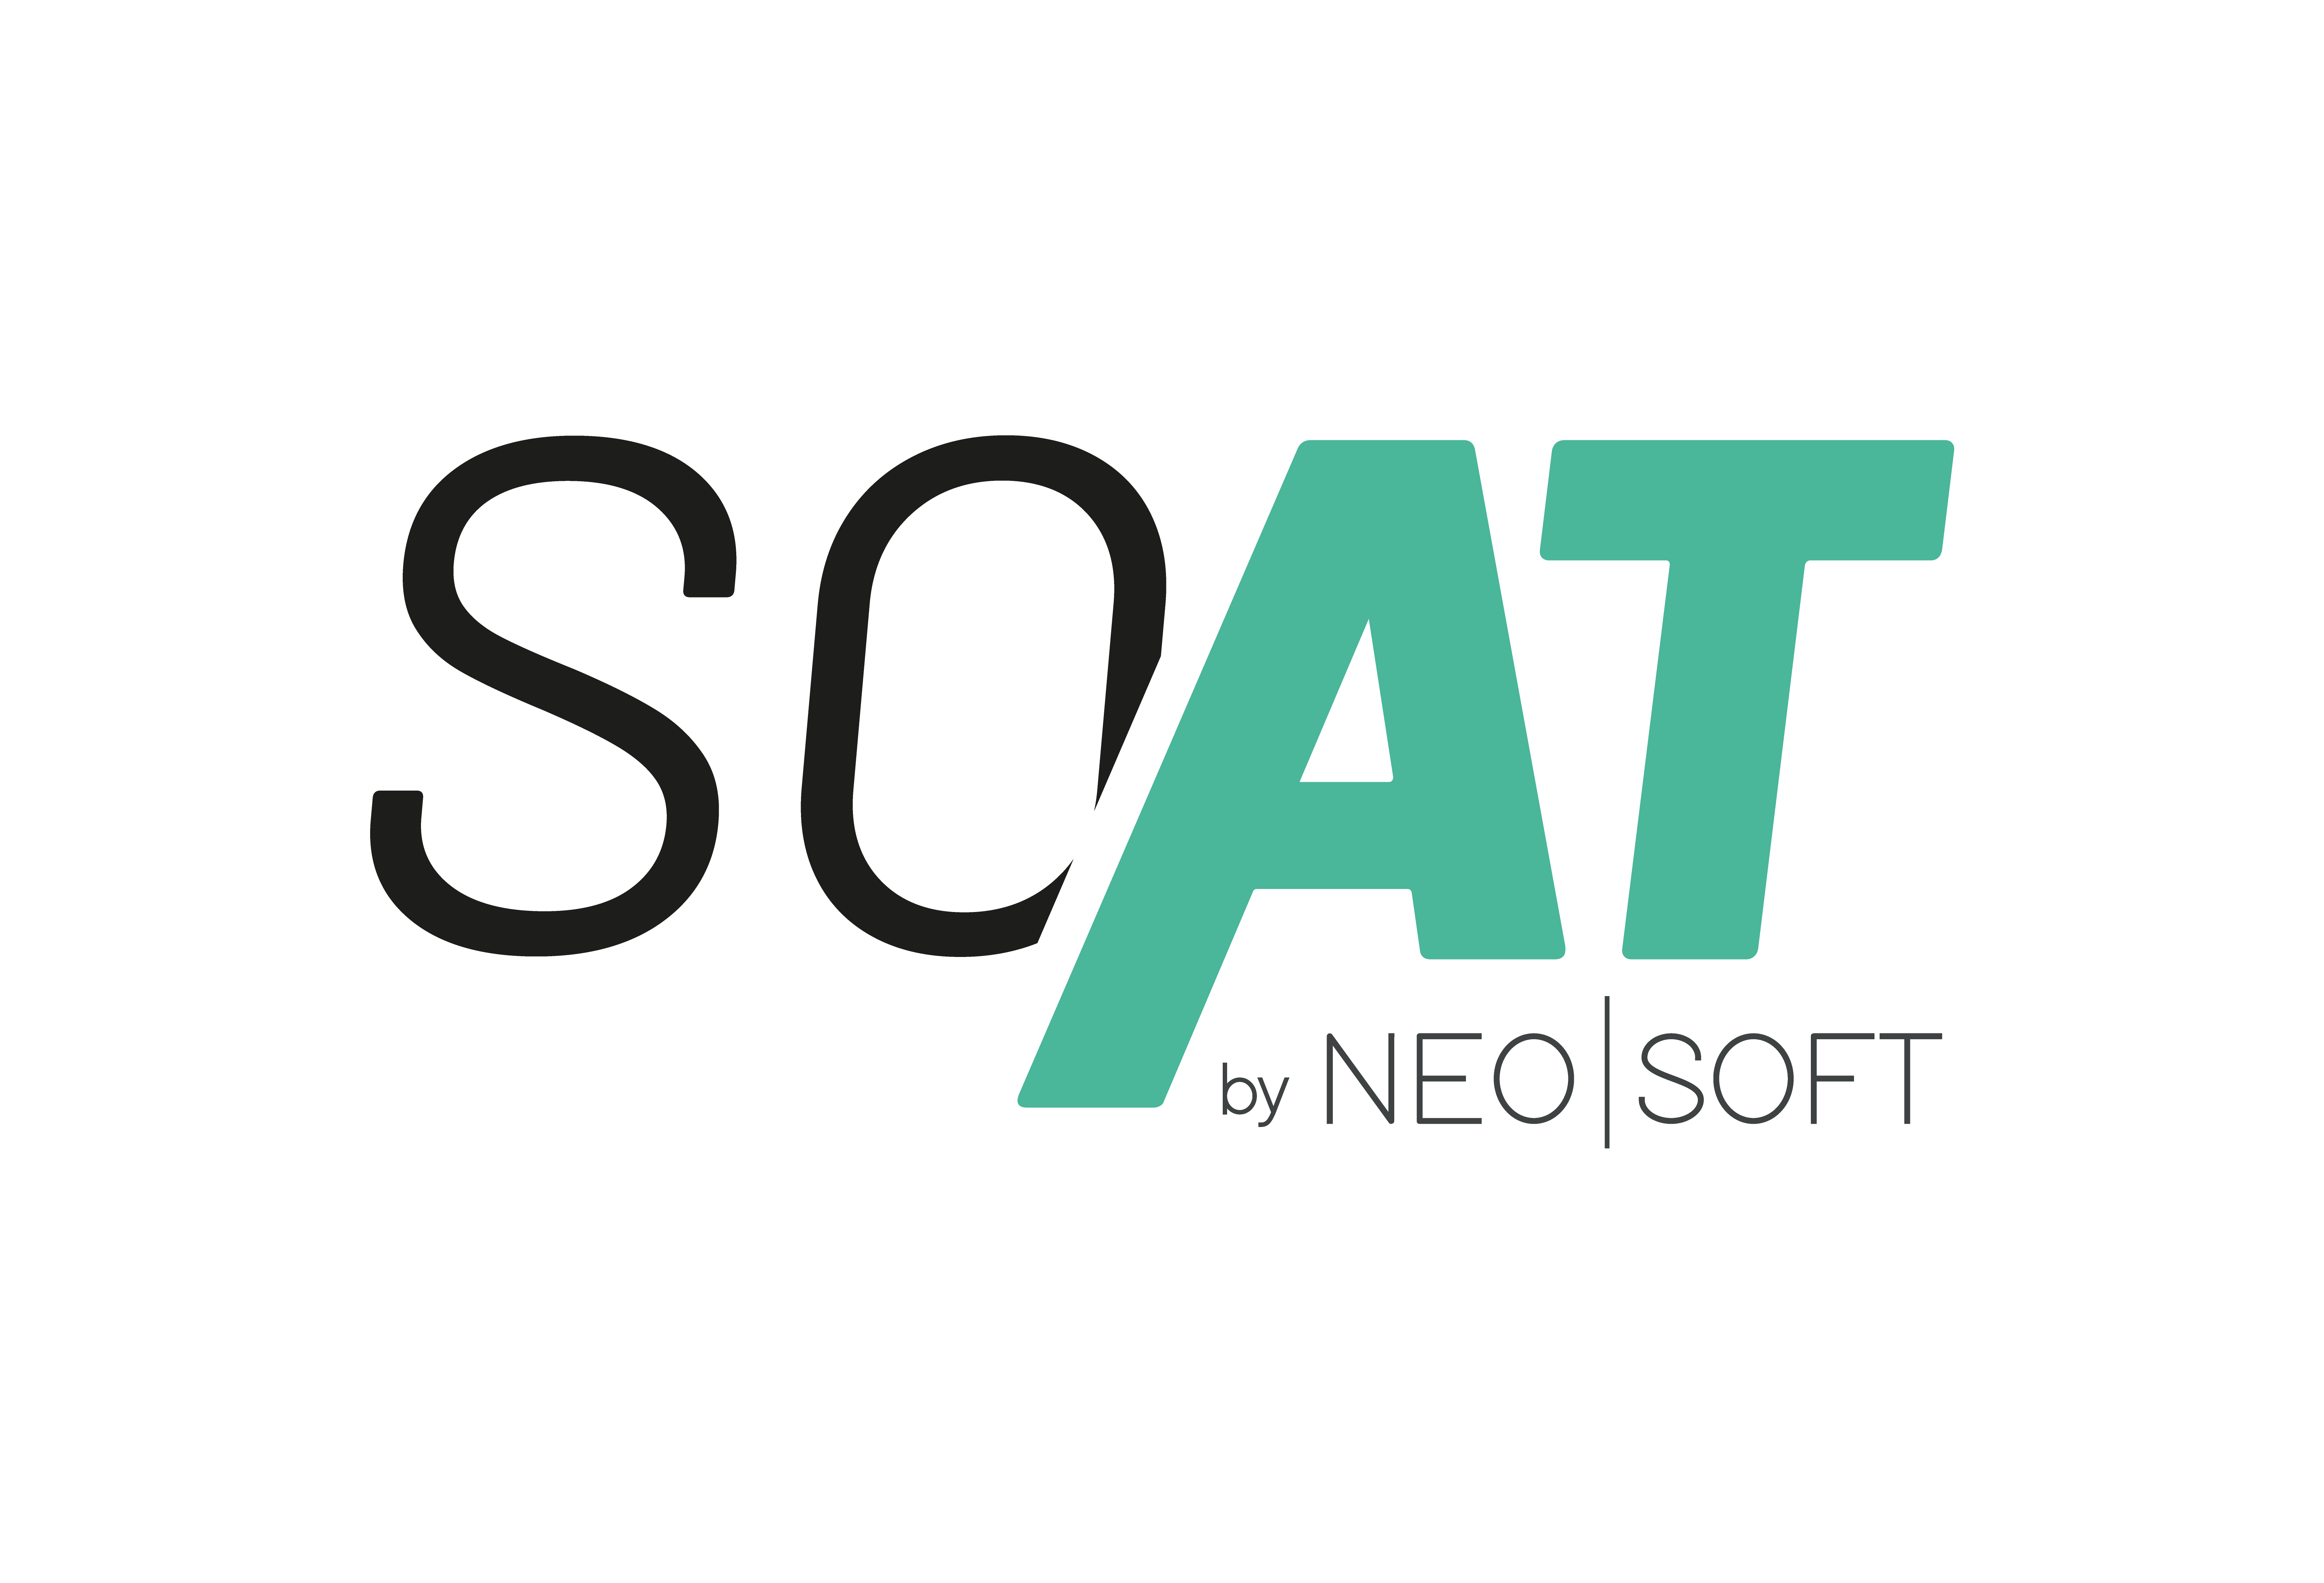 SOAT by Néo-Soft